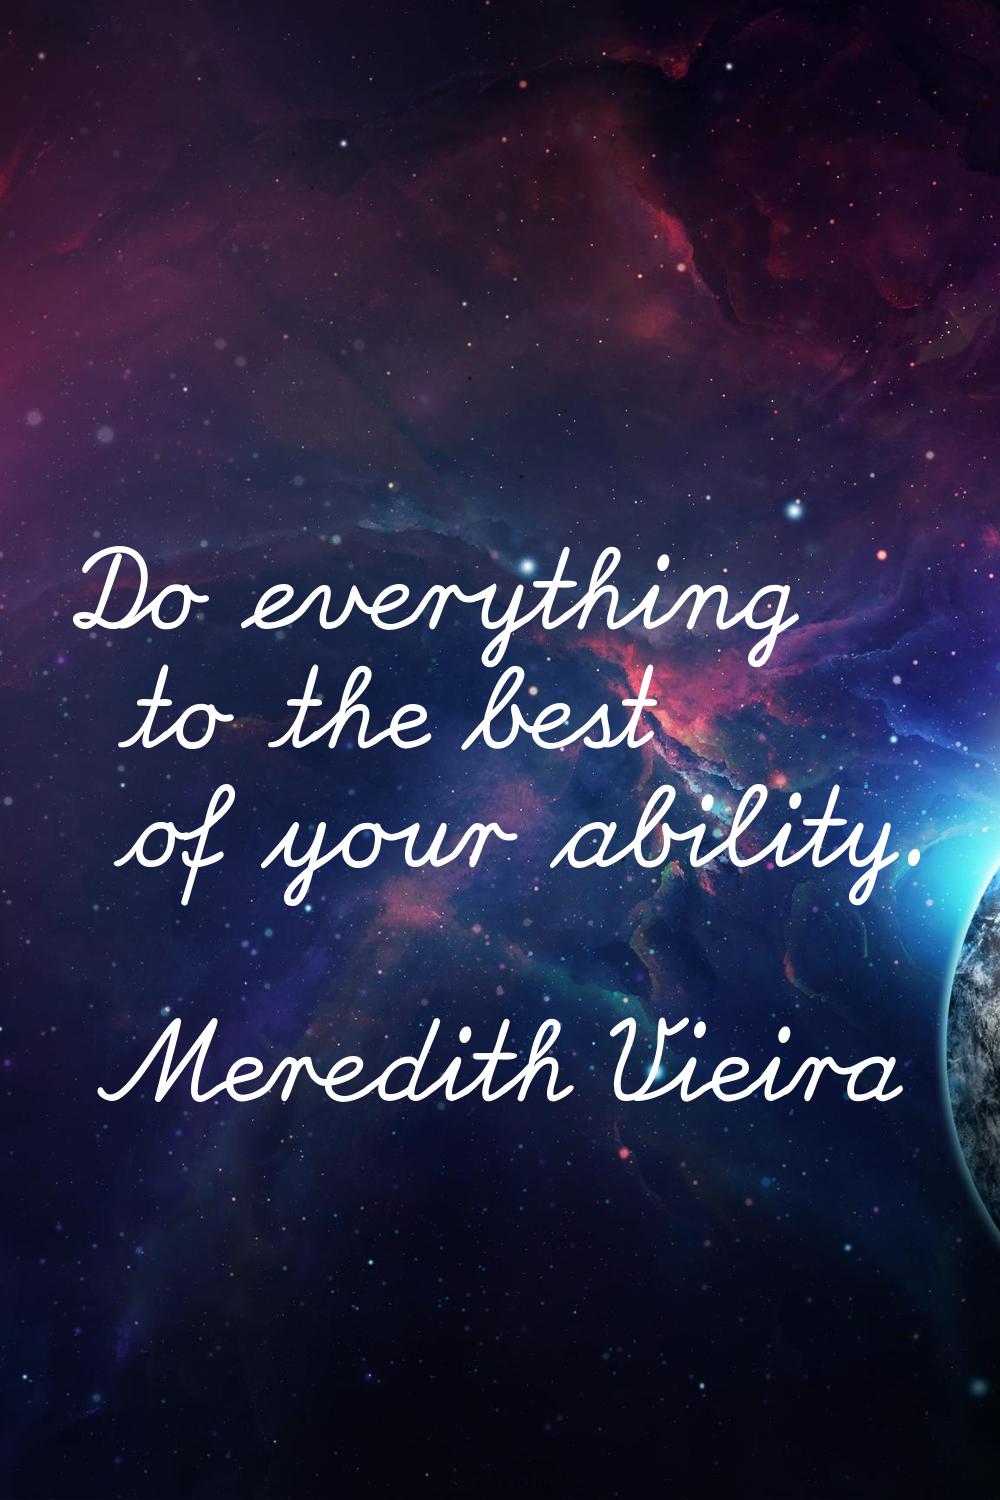 Do everything to the best of your ability.